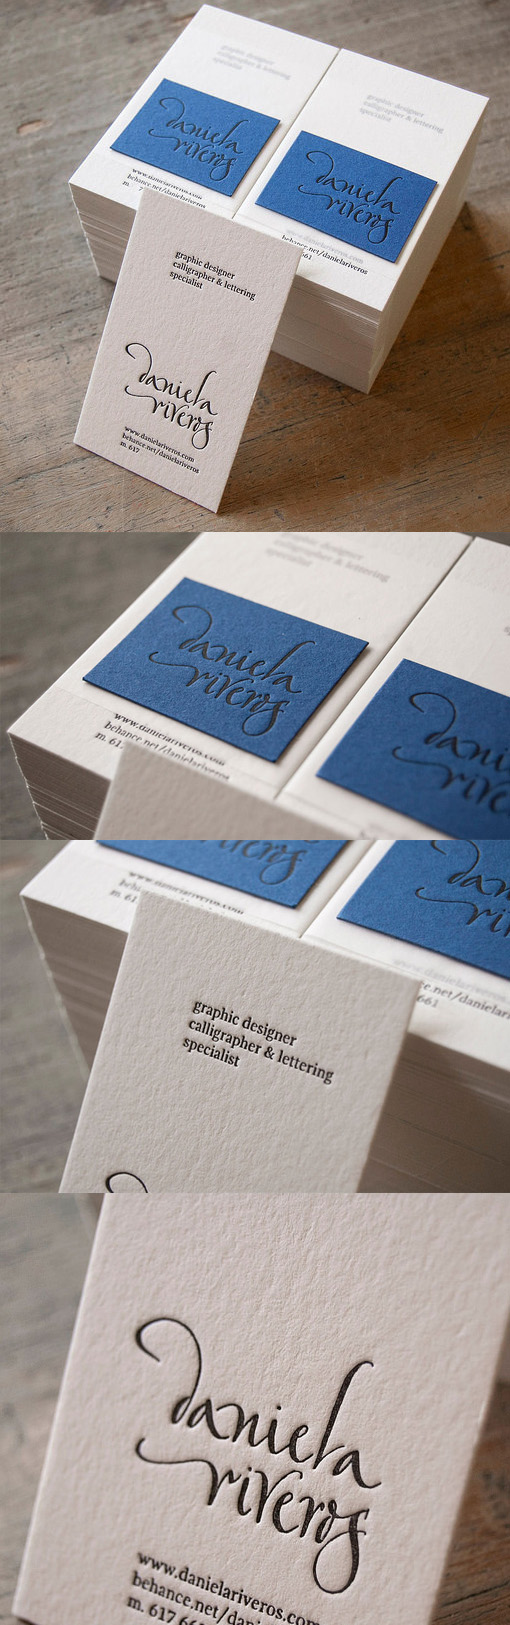 Elegant Hand Drawn Typography On A Layered Letterpress Business Card